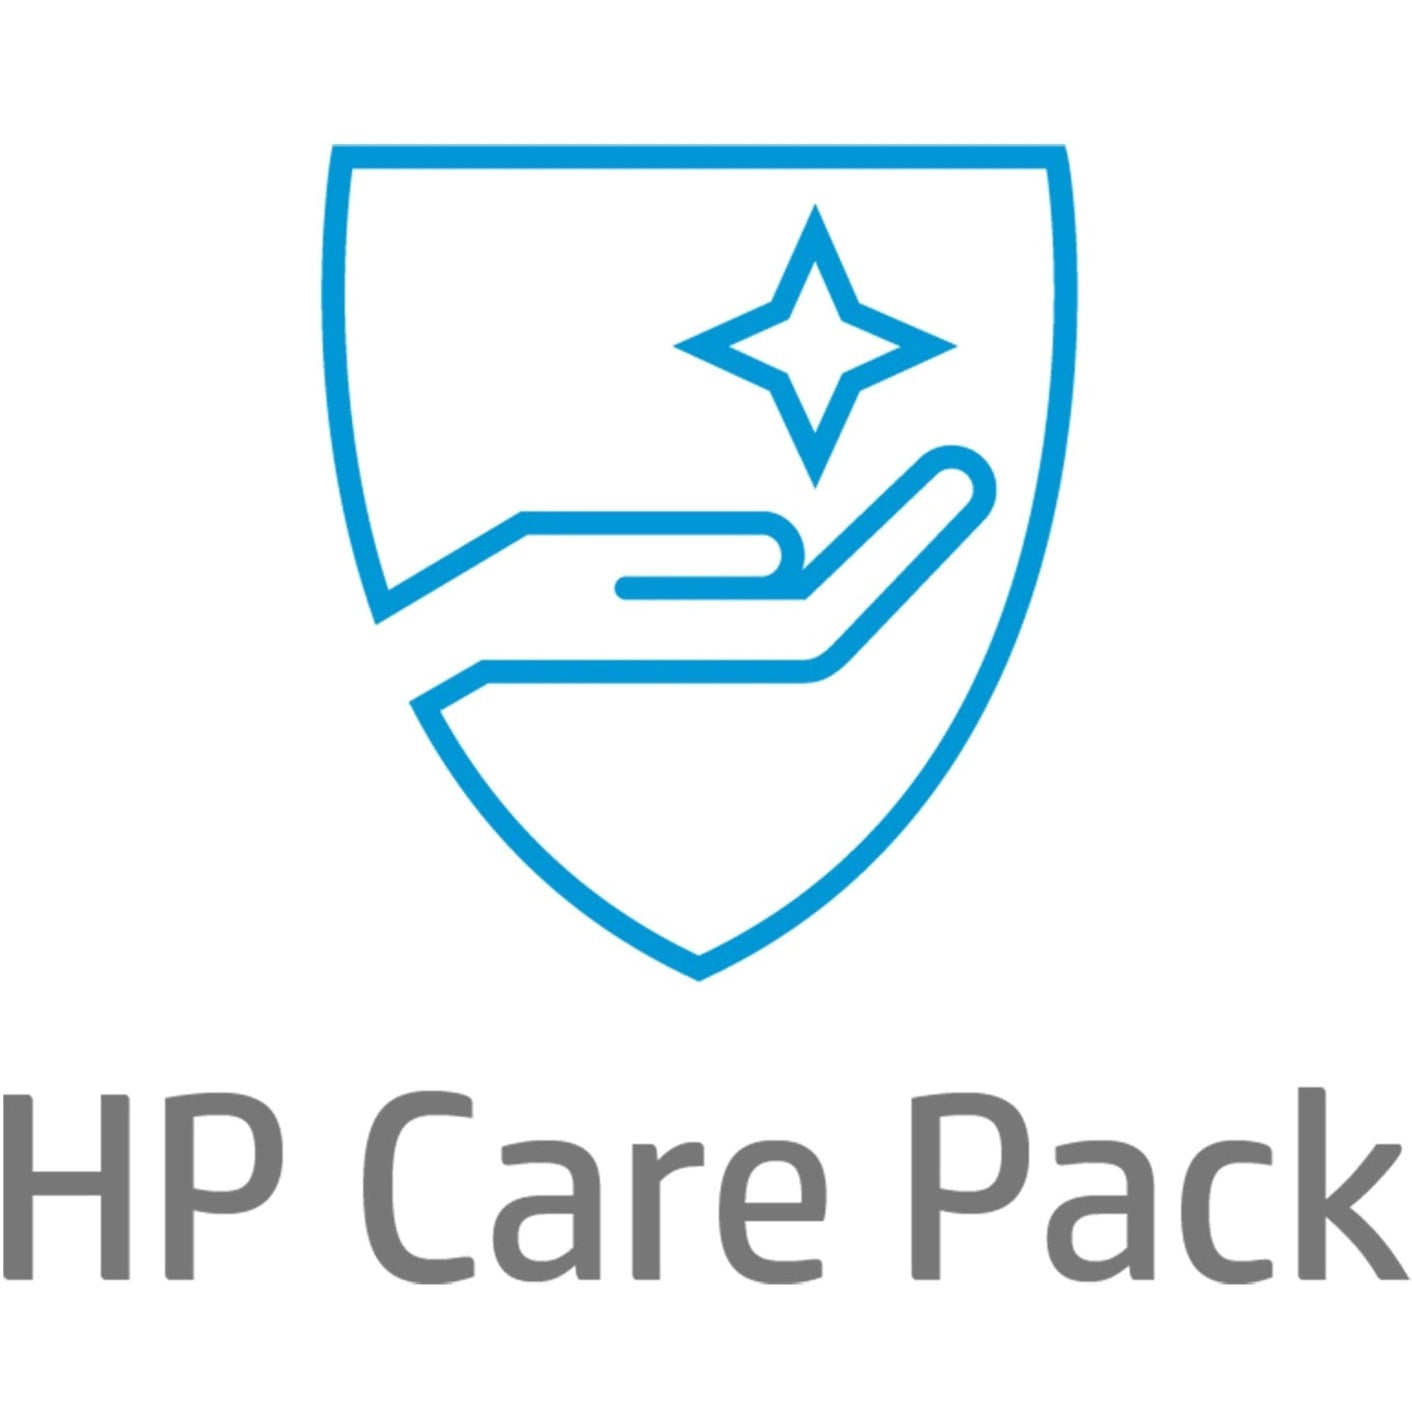 HP Care Pack - 5 Year - Warranty (UB0G8E)